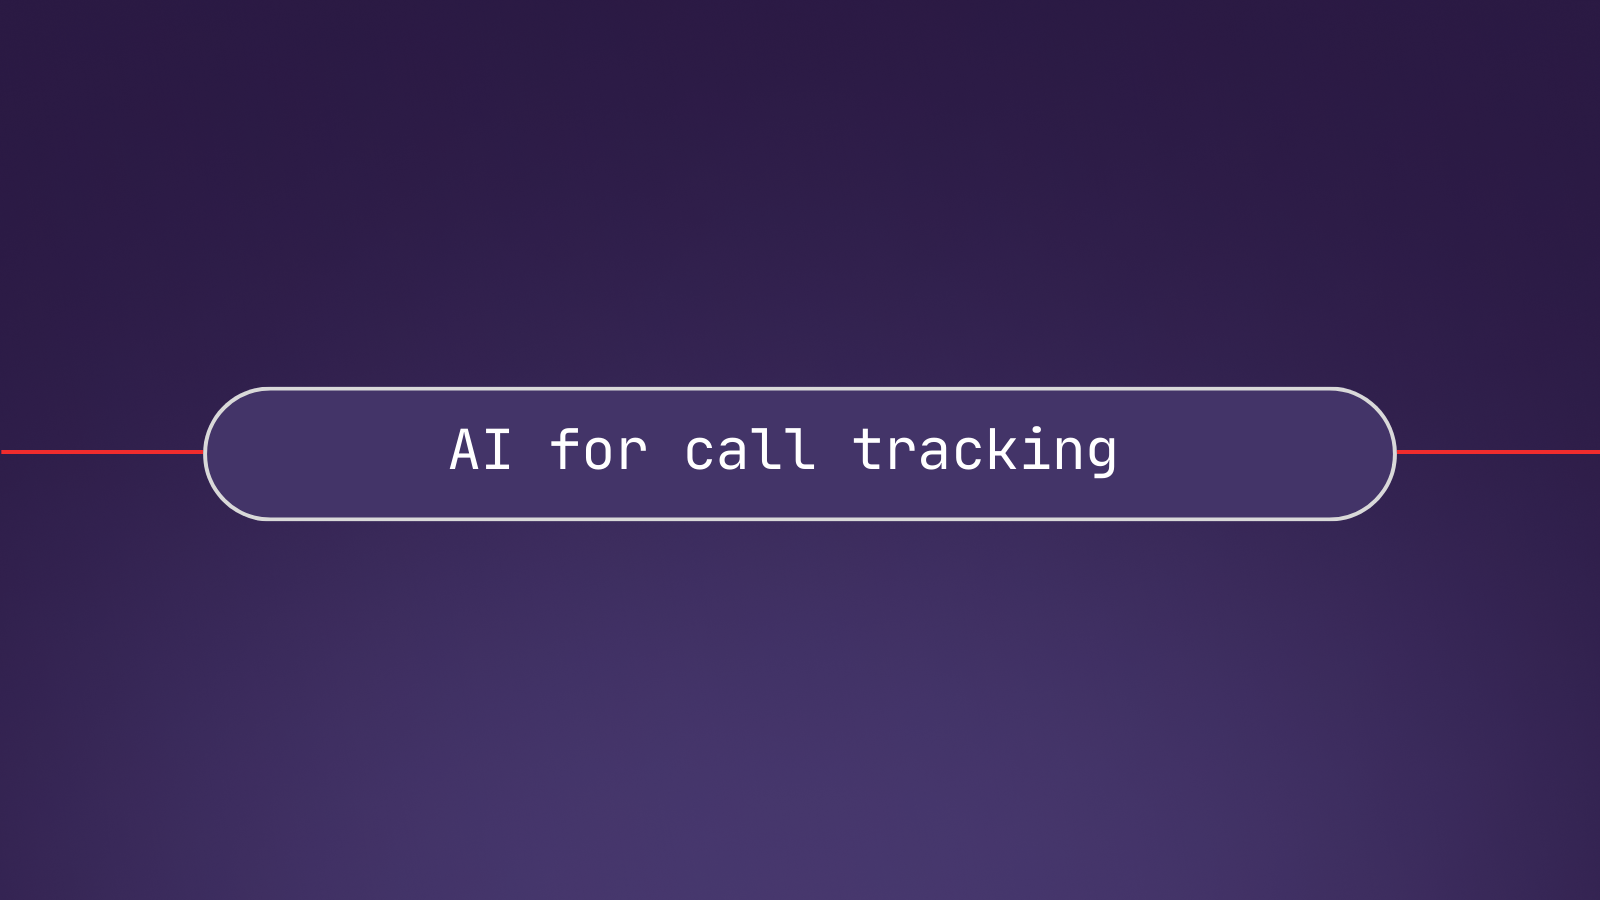 Why product teams at top call tracking solutions are turning to AI